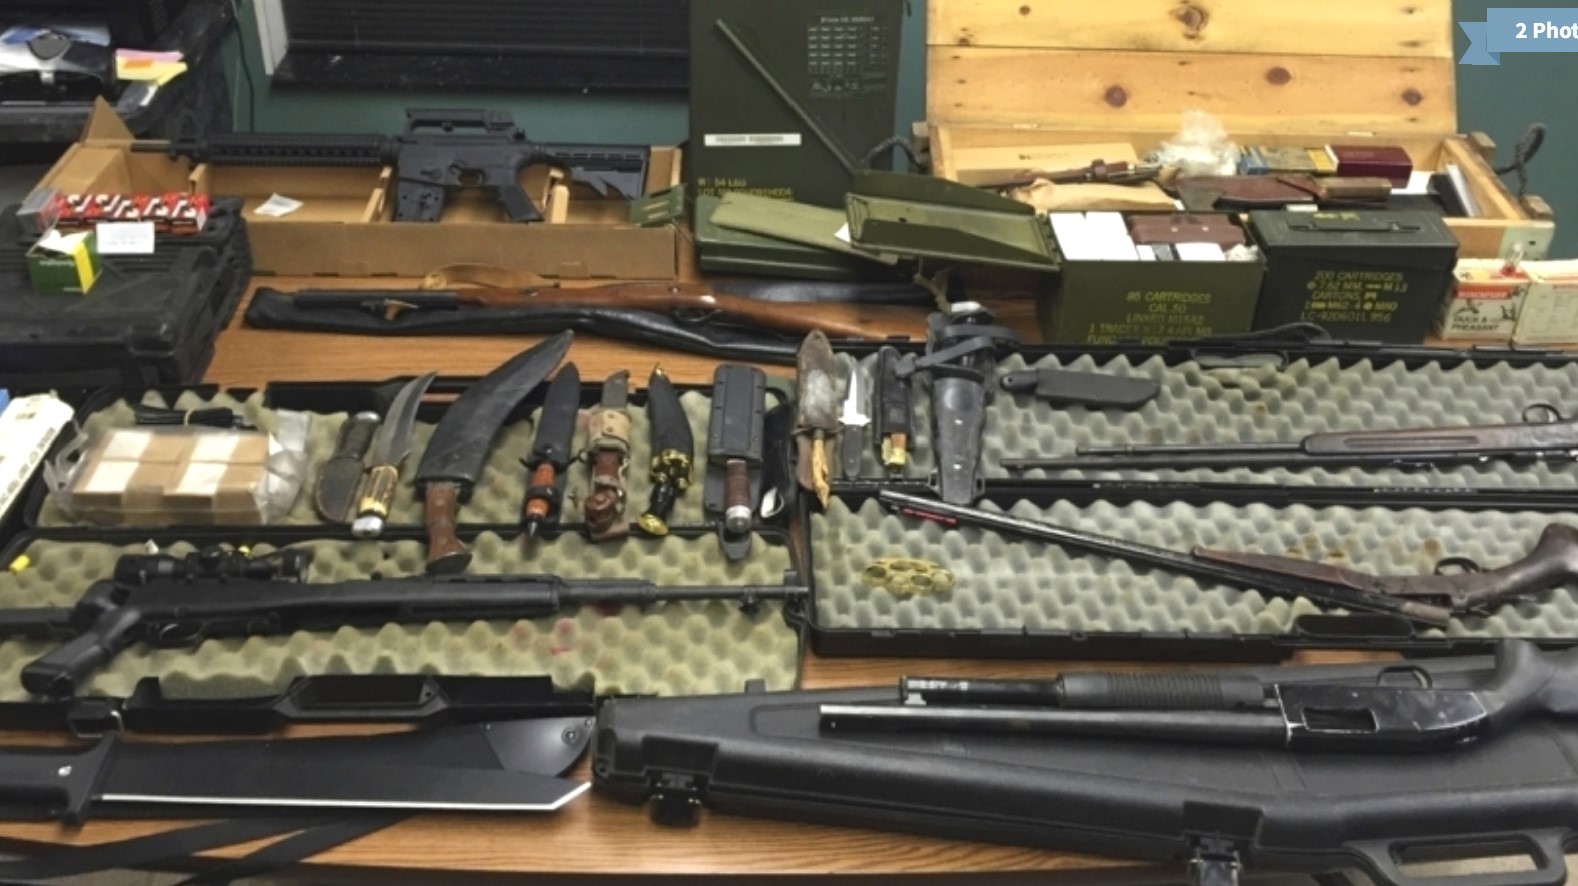 FILE - This undated photo provided by the Van Buren County Sheriff’s Office in Paw Paw, Mich., shows stolen guns, ammunition and knives that were recovered Sept. 12, 2015, in Antwerp Township, Mich. The rate of guns stolen from cars in the U.S. has tripled over the last decade, making them the largest source of stolen guns in the country, a new analysis of FBI data by the gun-safety group Everytown found. (Van Buren County Sheriff’s Office via AP)